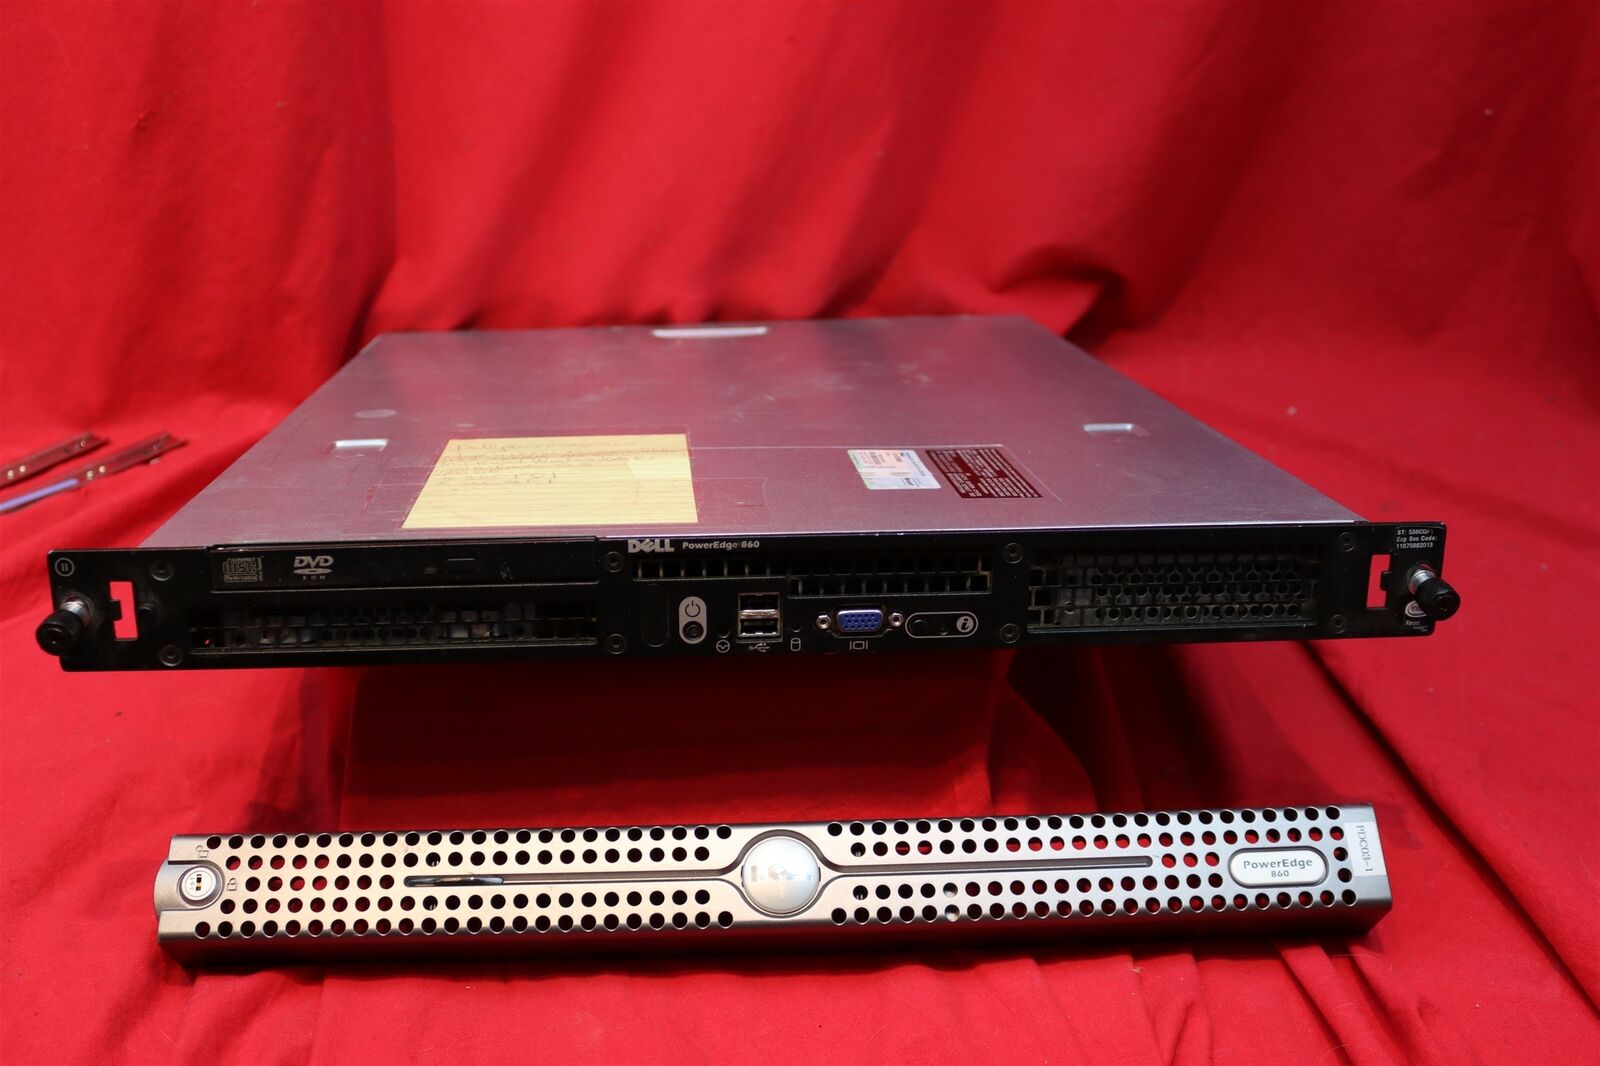 Dell PowerEdge 860 w. 4GB, xeon 2.4GHz 4 cores , 400MB mirrored, Server 2008-R2